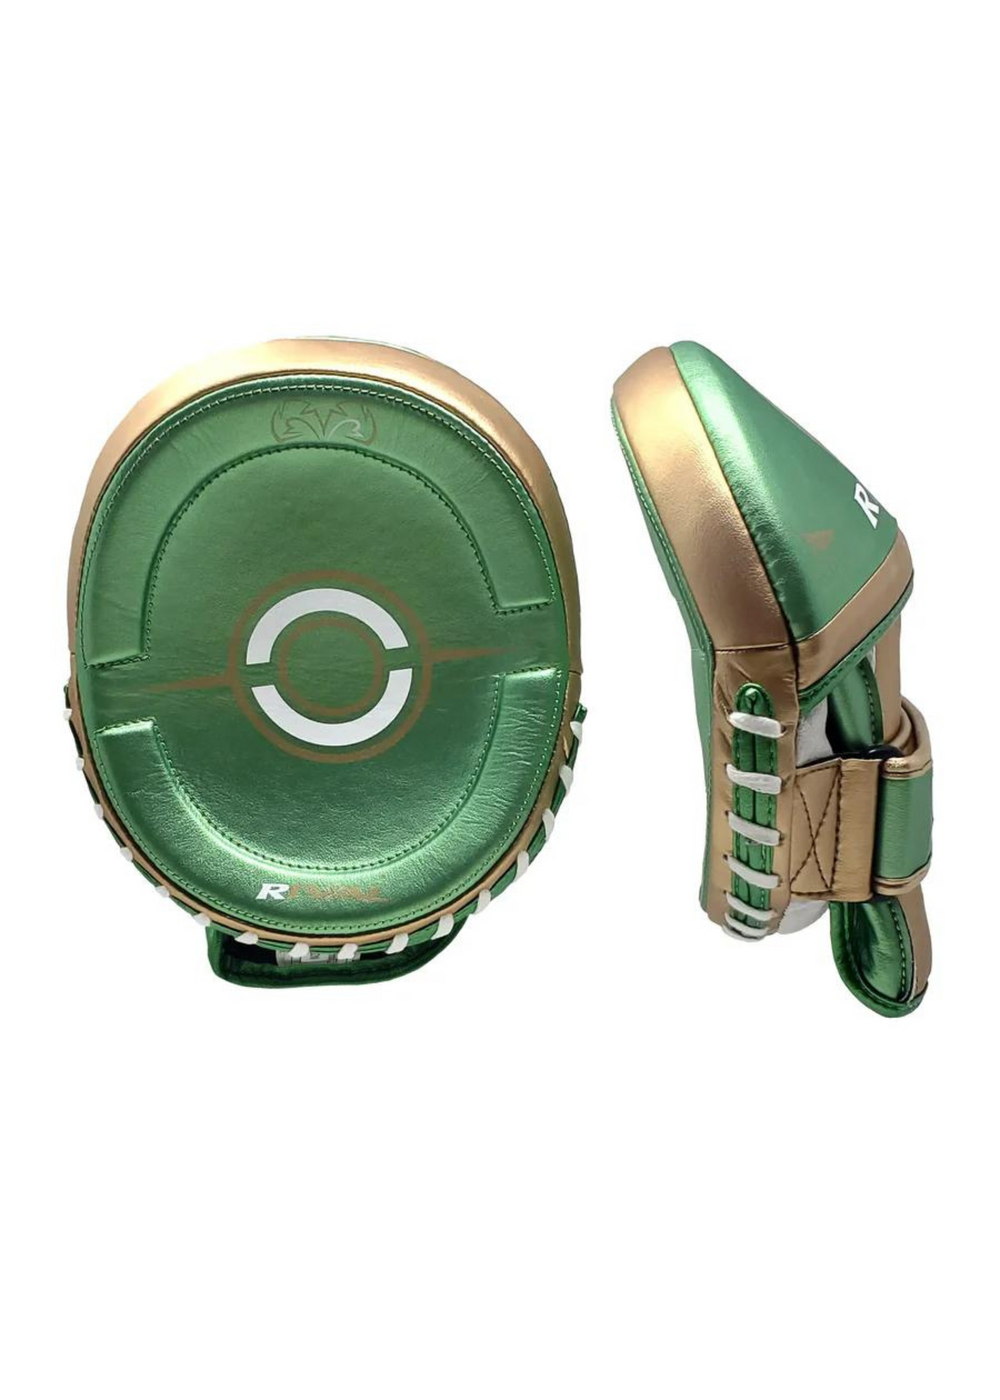 RIVAL RPM100 PROFESSIONAL PUNCH MITTS - GREEN/GOLD